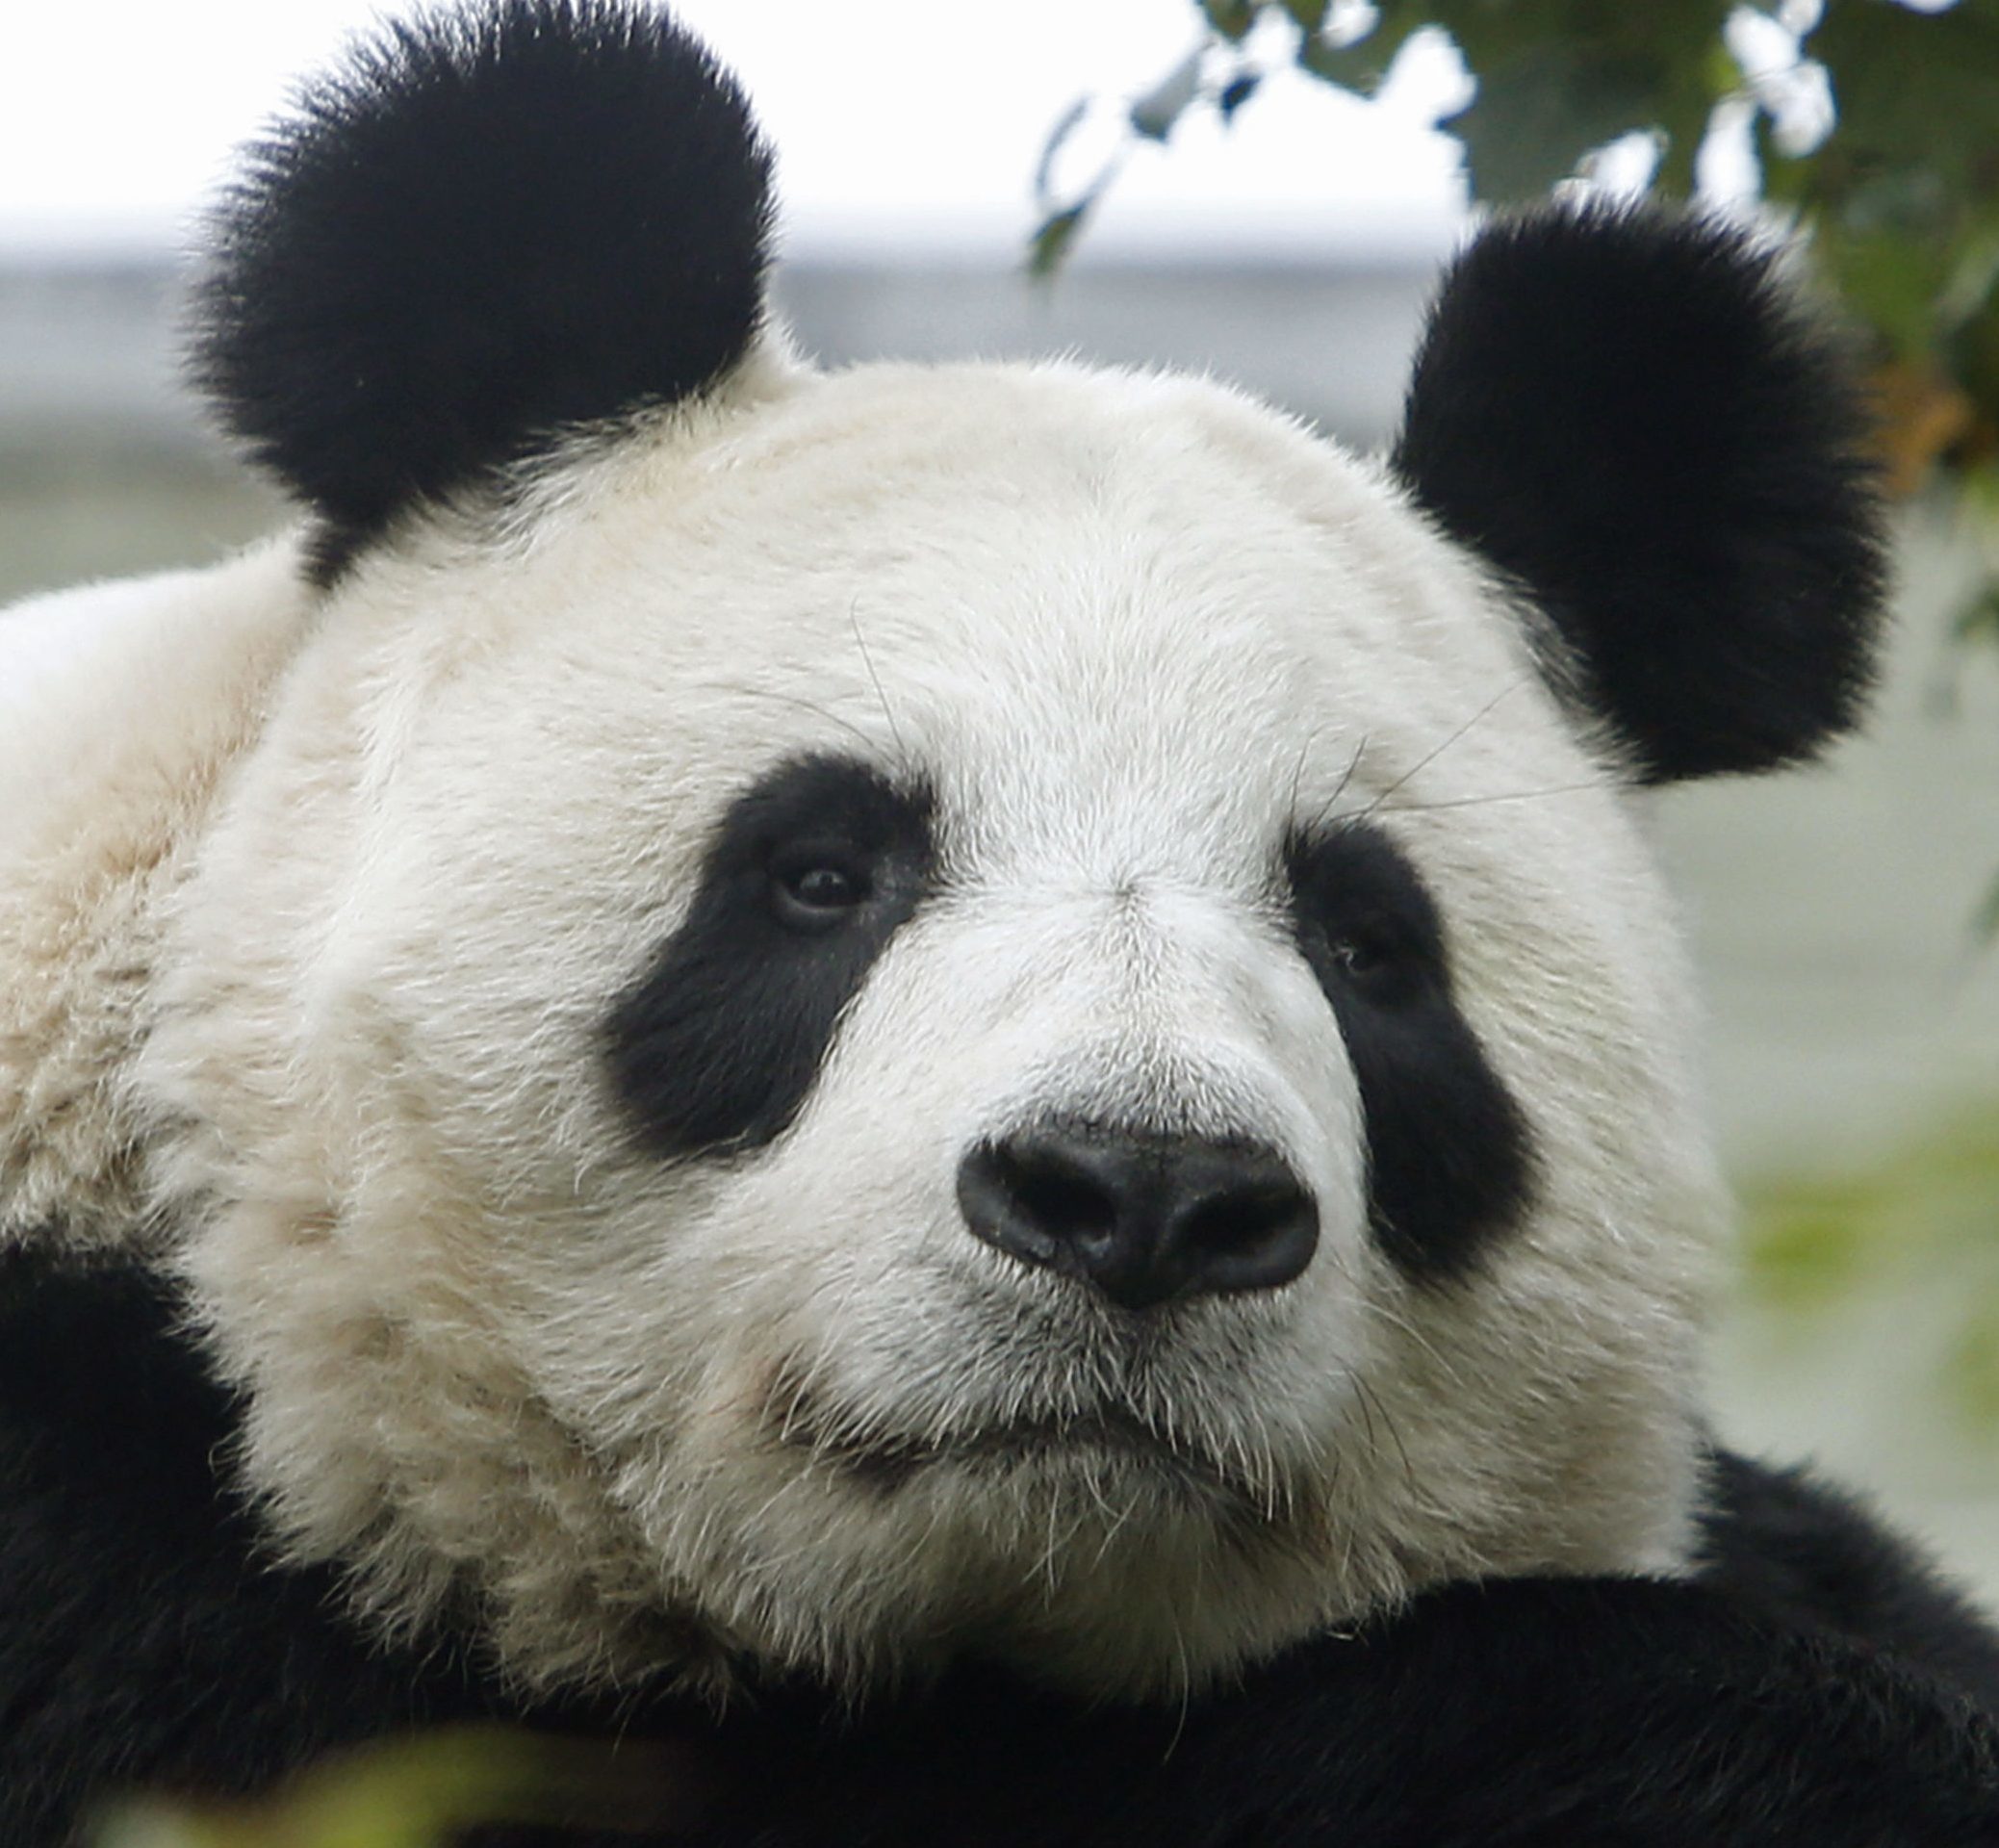 Tian Tian, the UK's only female giant panda, is "believed" to be pregnant and being closely monitored, according to Edinburgh Zoo. (Danny Lawson/PA Wire)